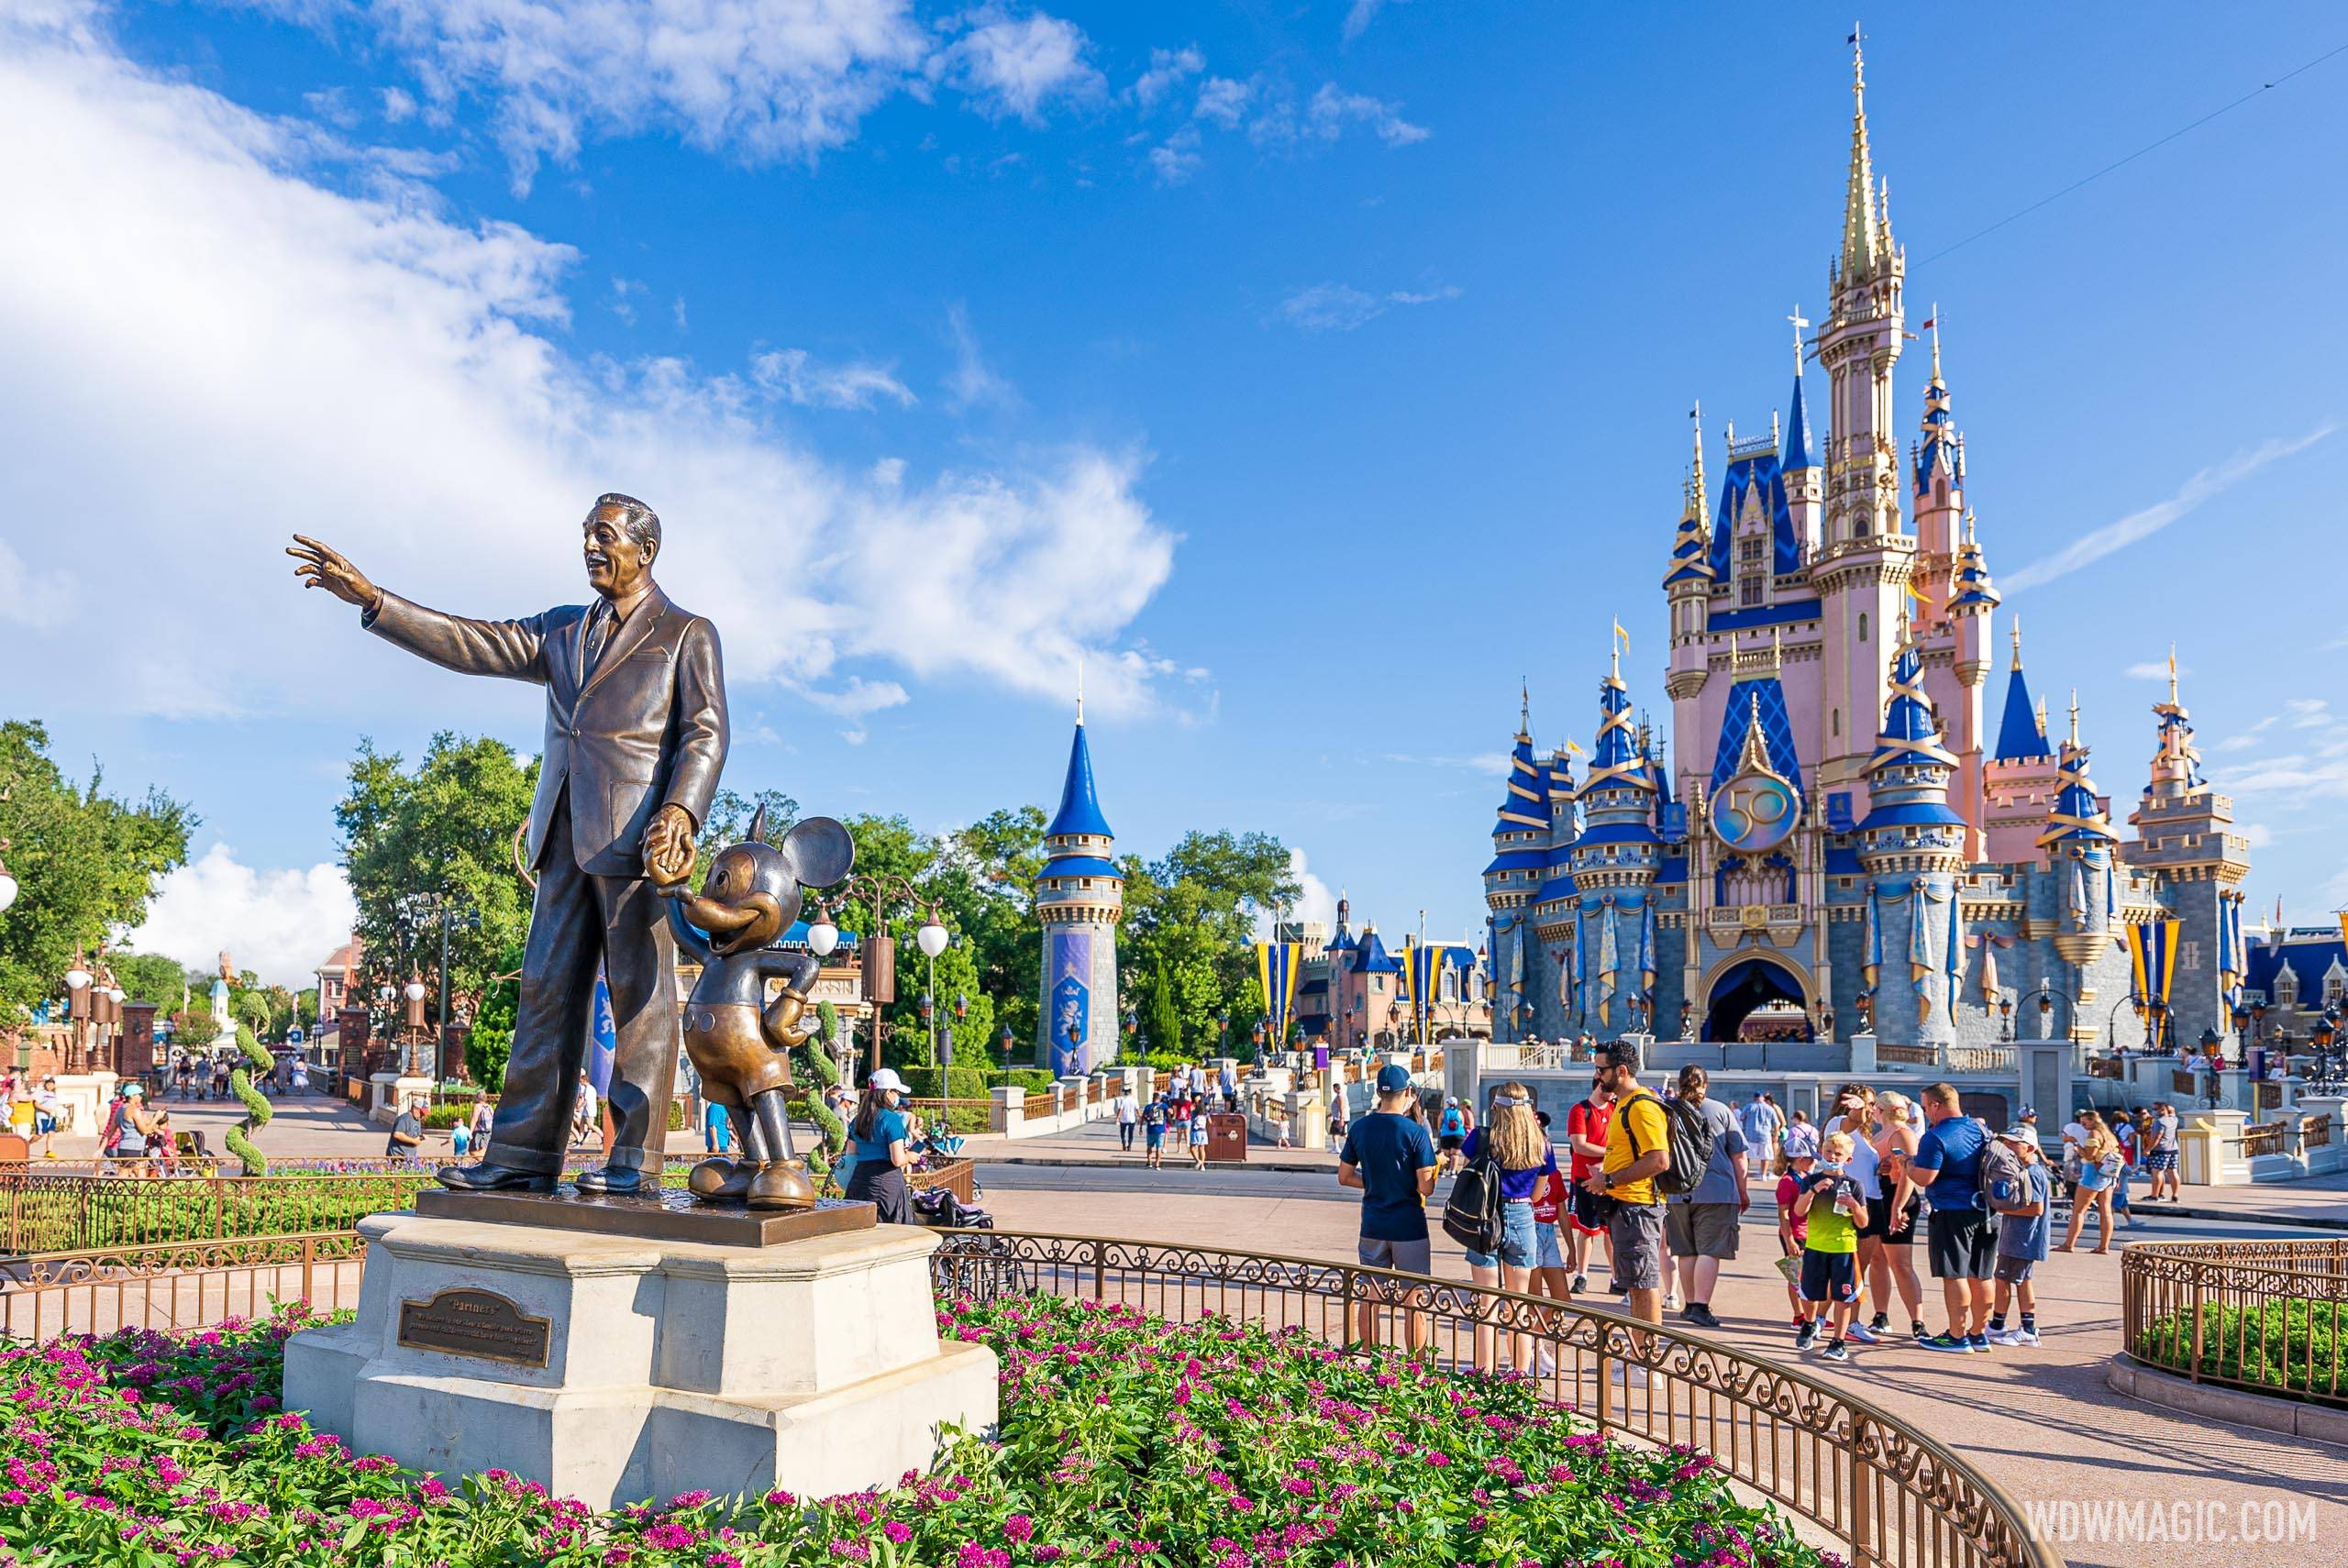 Park hours at Magic Kingdom For January 31 2023 are 9:00am to 4:30pm